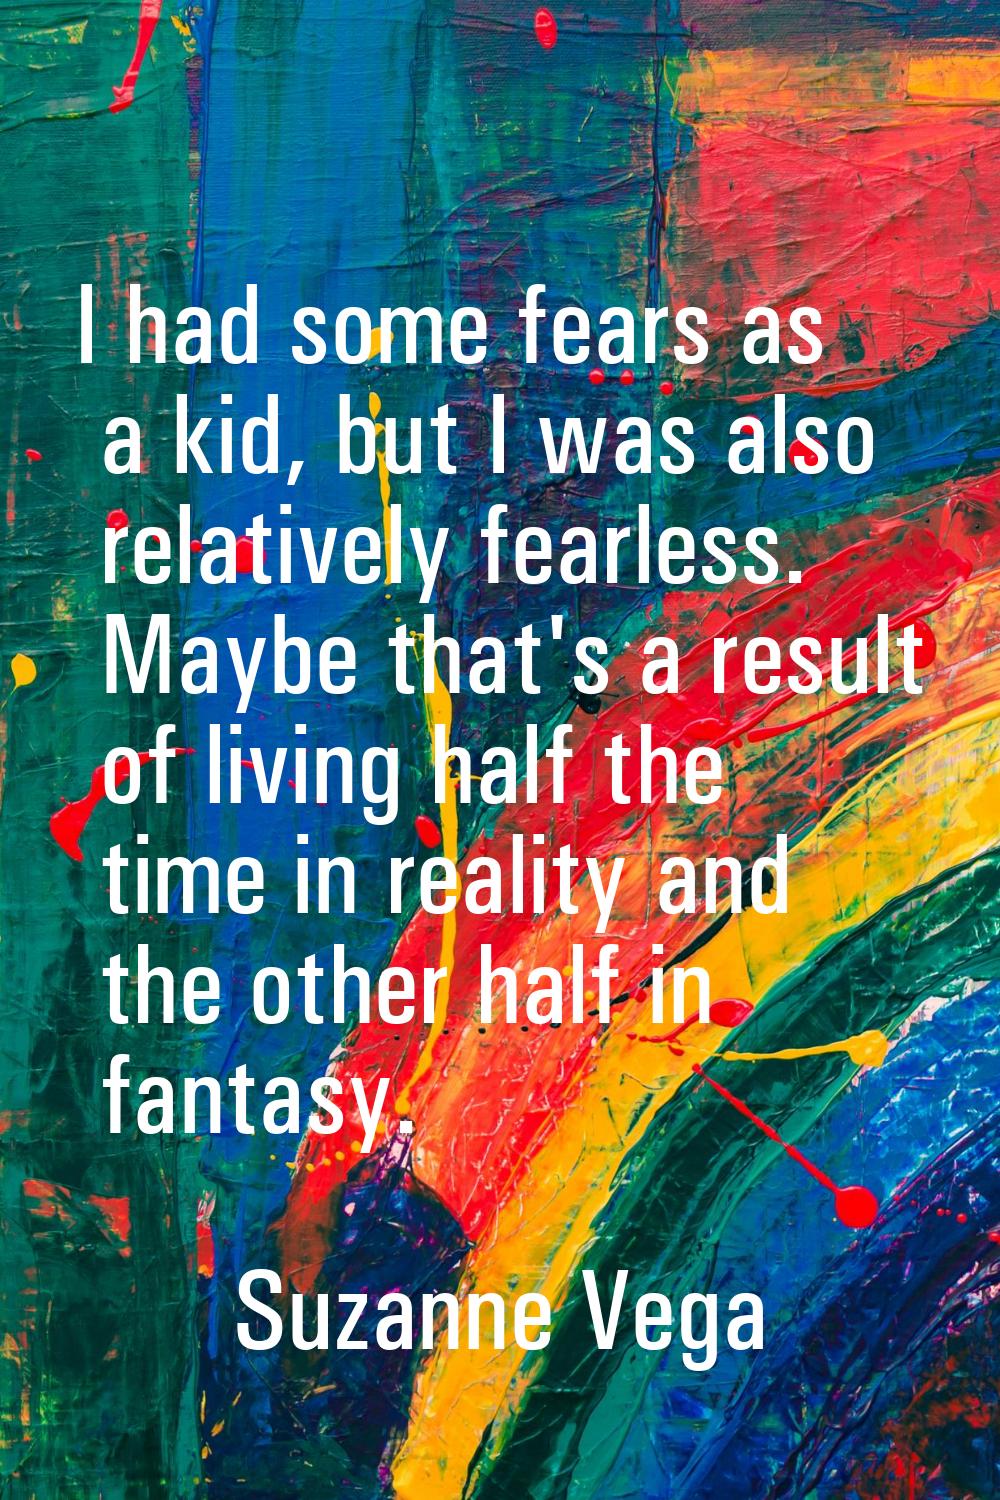 I had some fears as a kid, but I was also relatively fearless. Maybe that's a result of living half